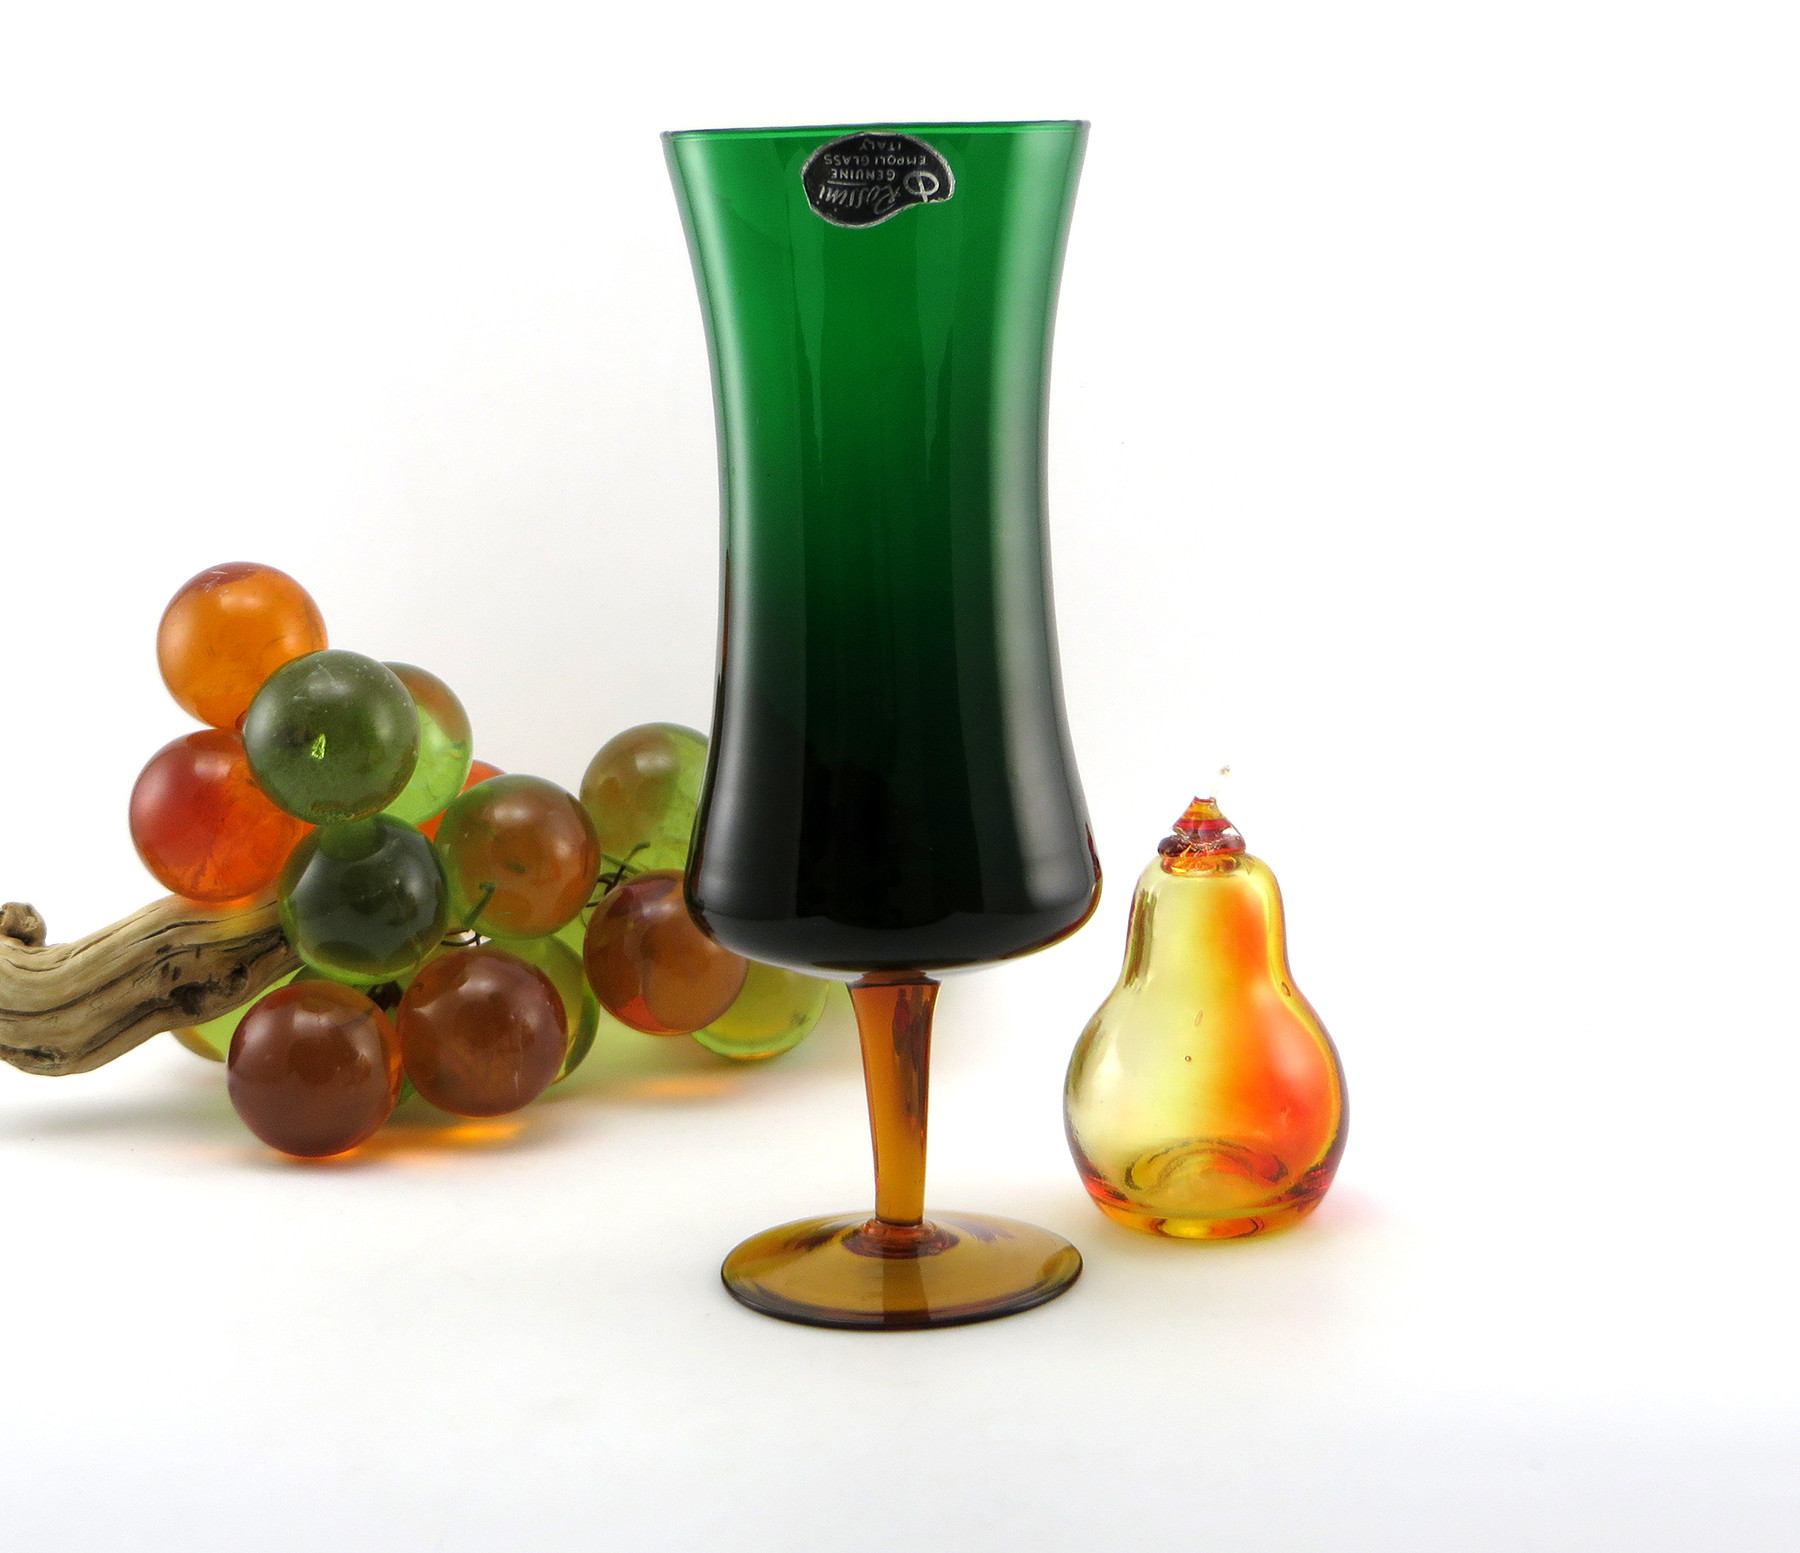 blown glass vases made in italy of rossini empoli art glass retro modern vase with label retro art glass with rossini empoli art glass retro modern vase with label